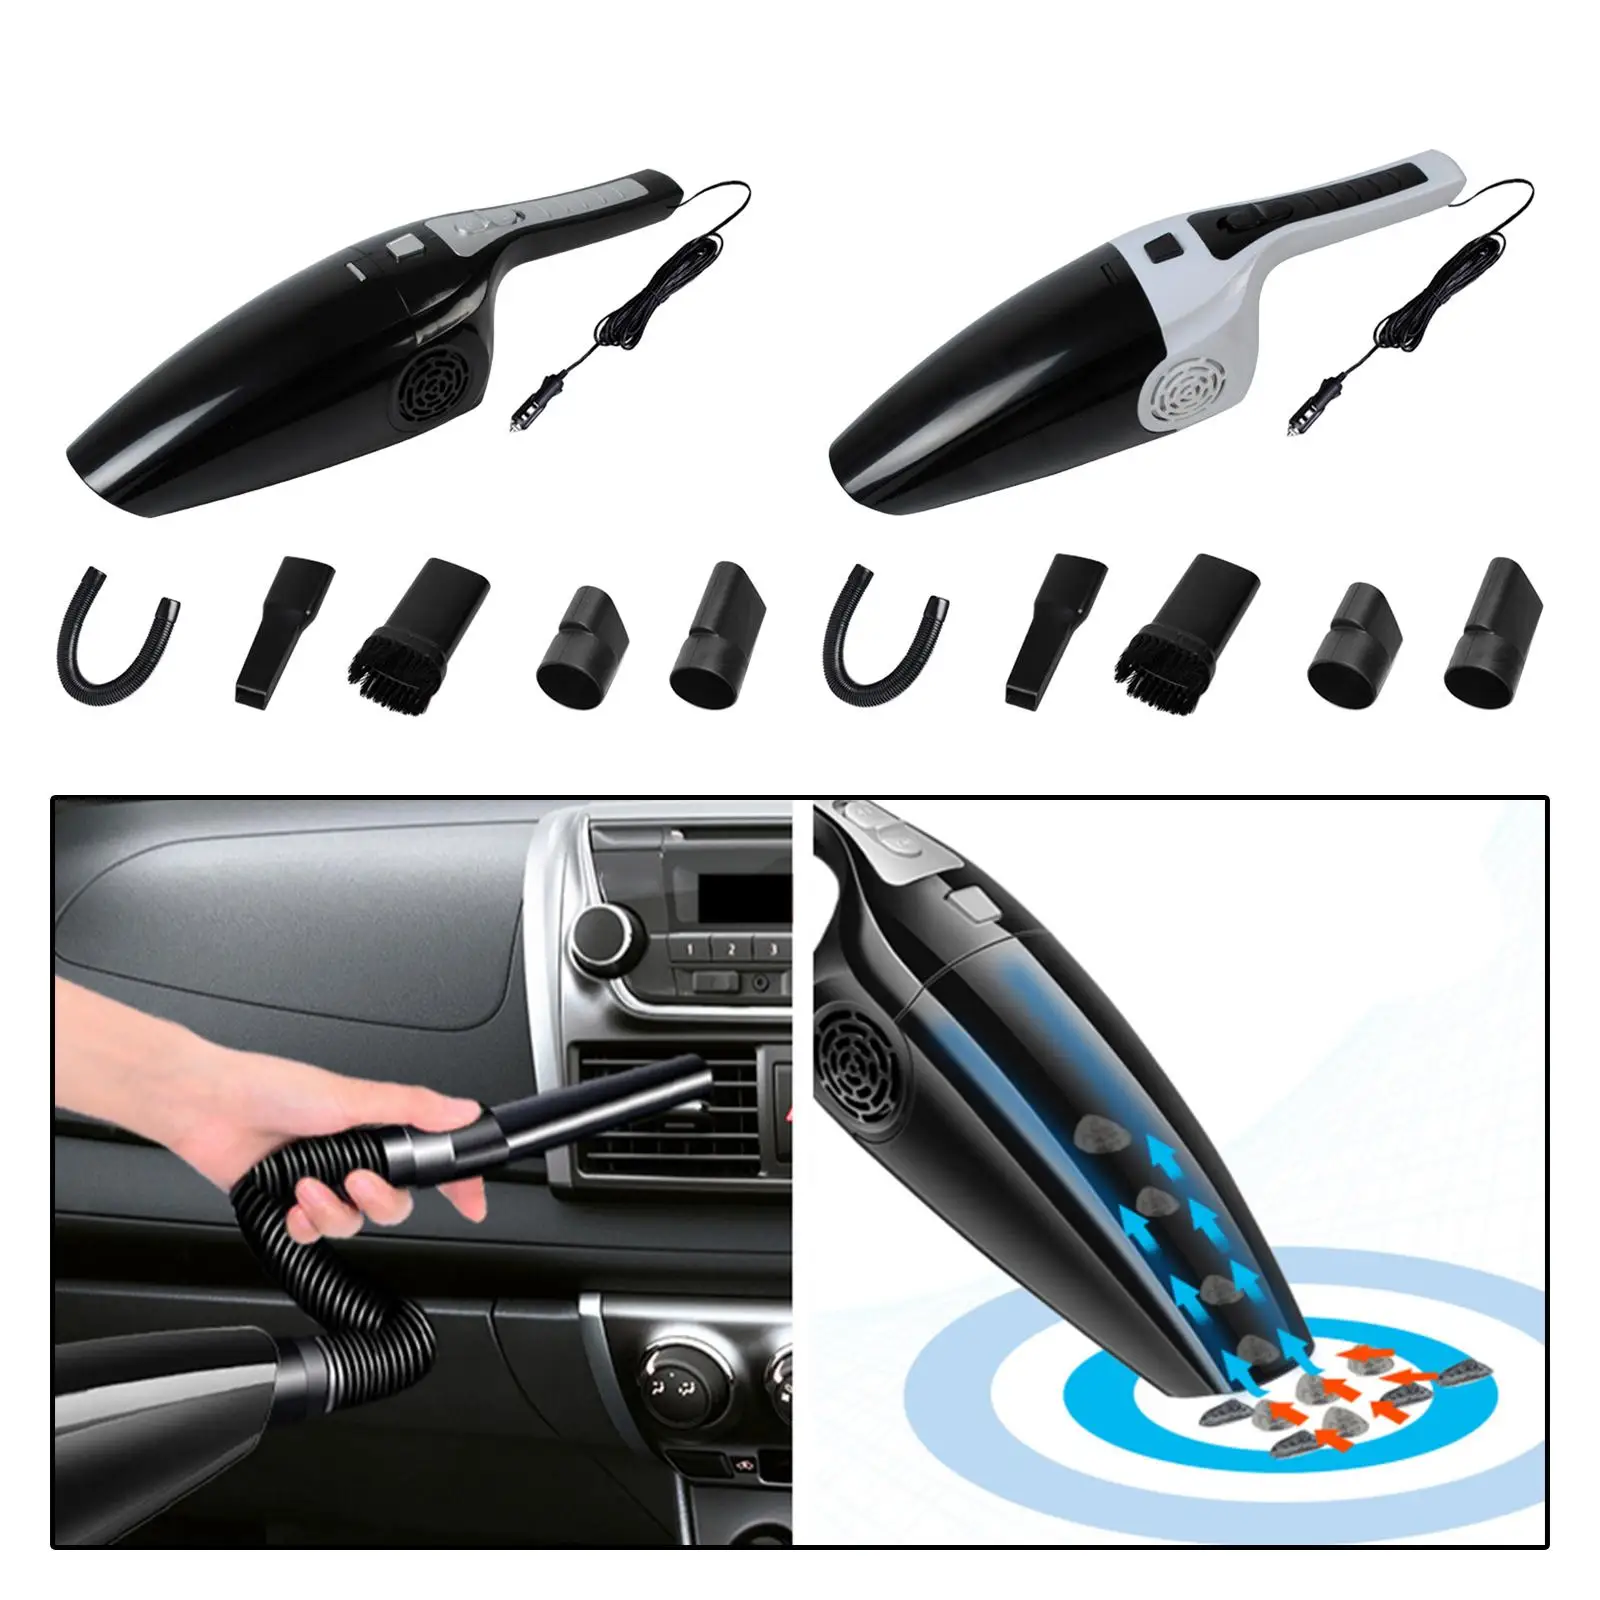 12V Wired Car Vacuum Cleaner Portable with 5 Attachments High Power 120W